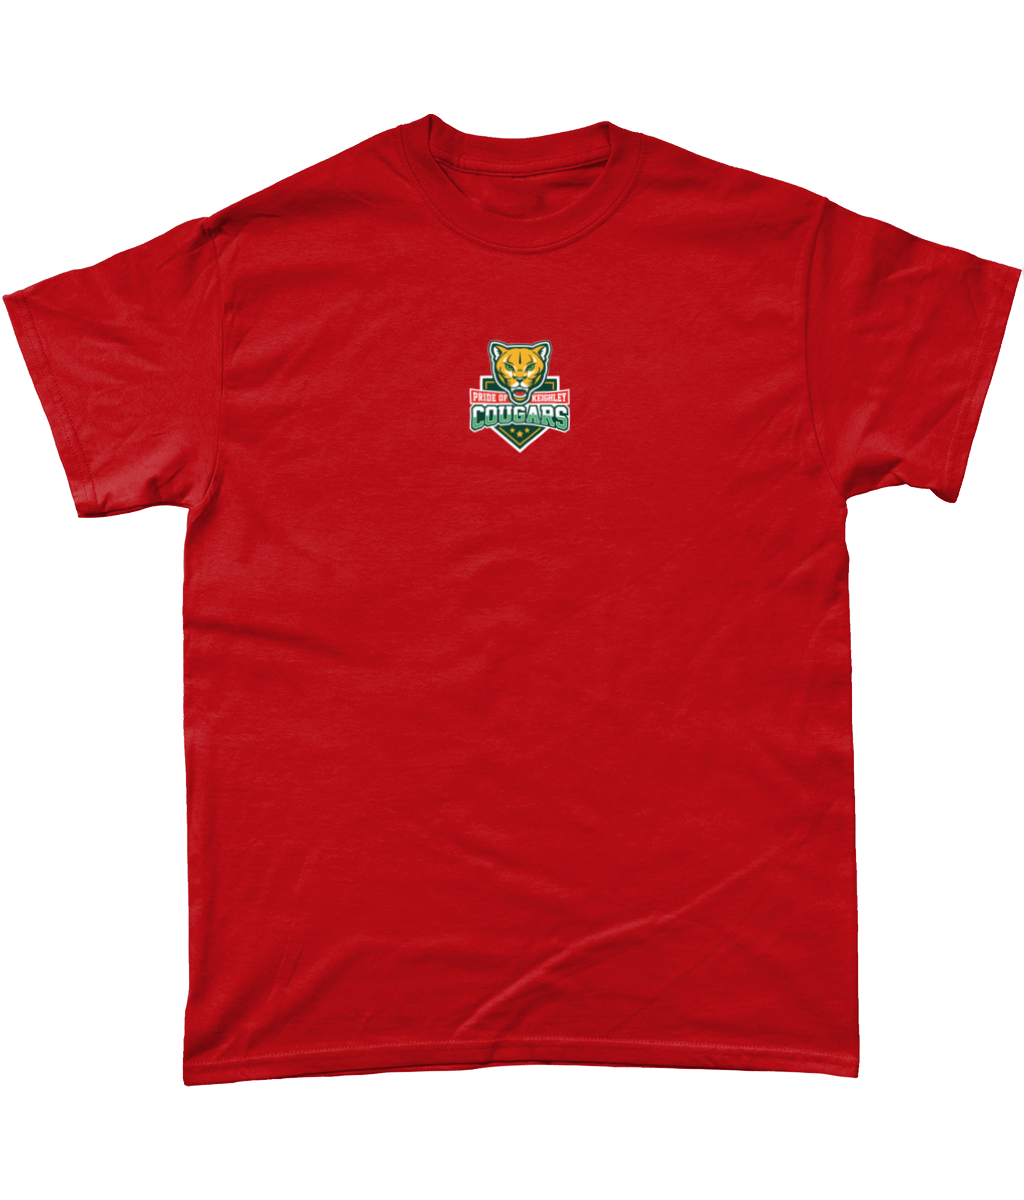 Keighley Cougars Work Hard & Trust The Process T-Shirt Red